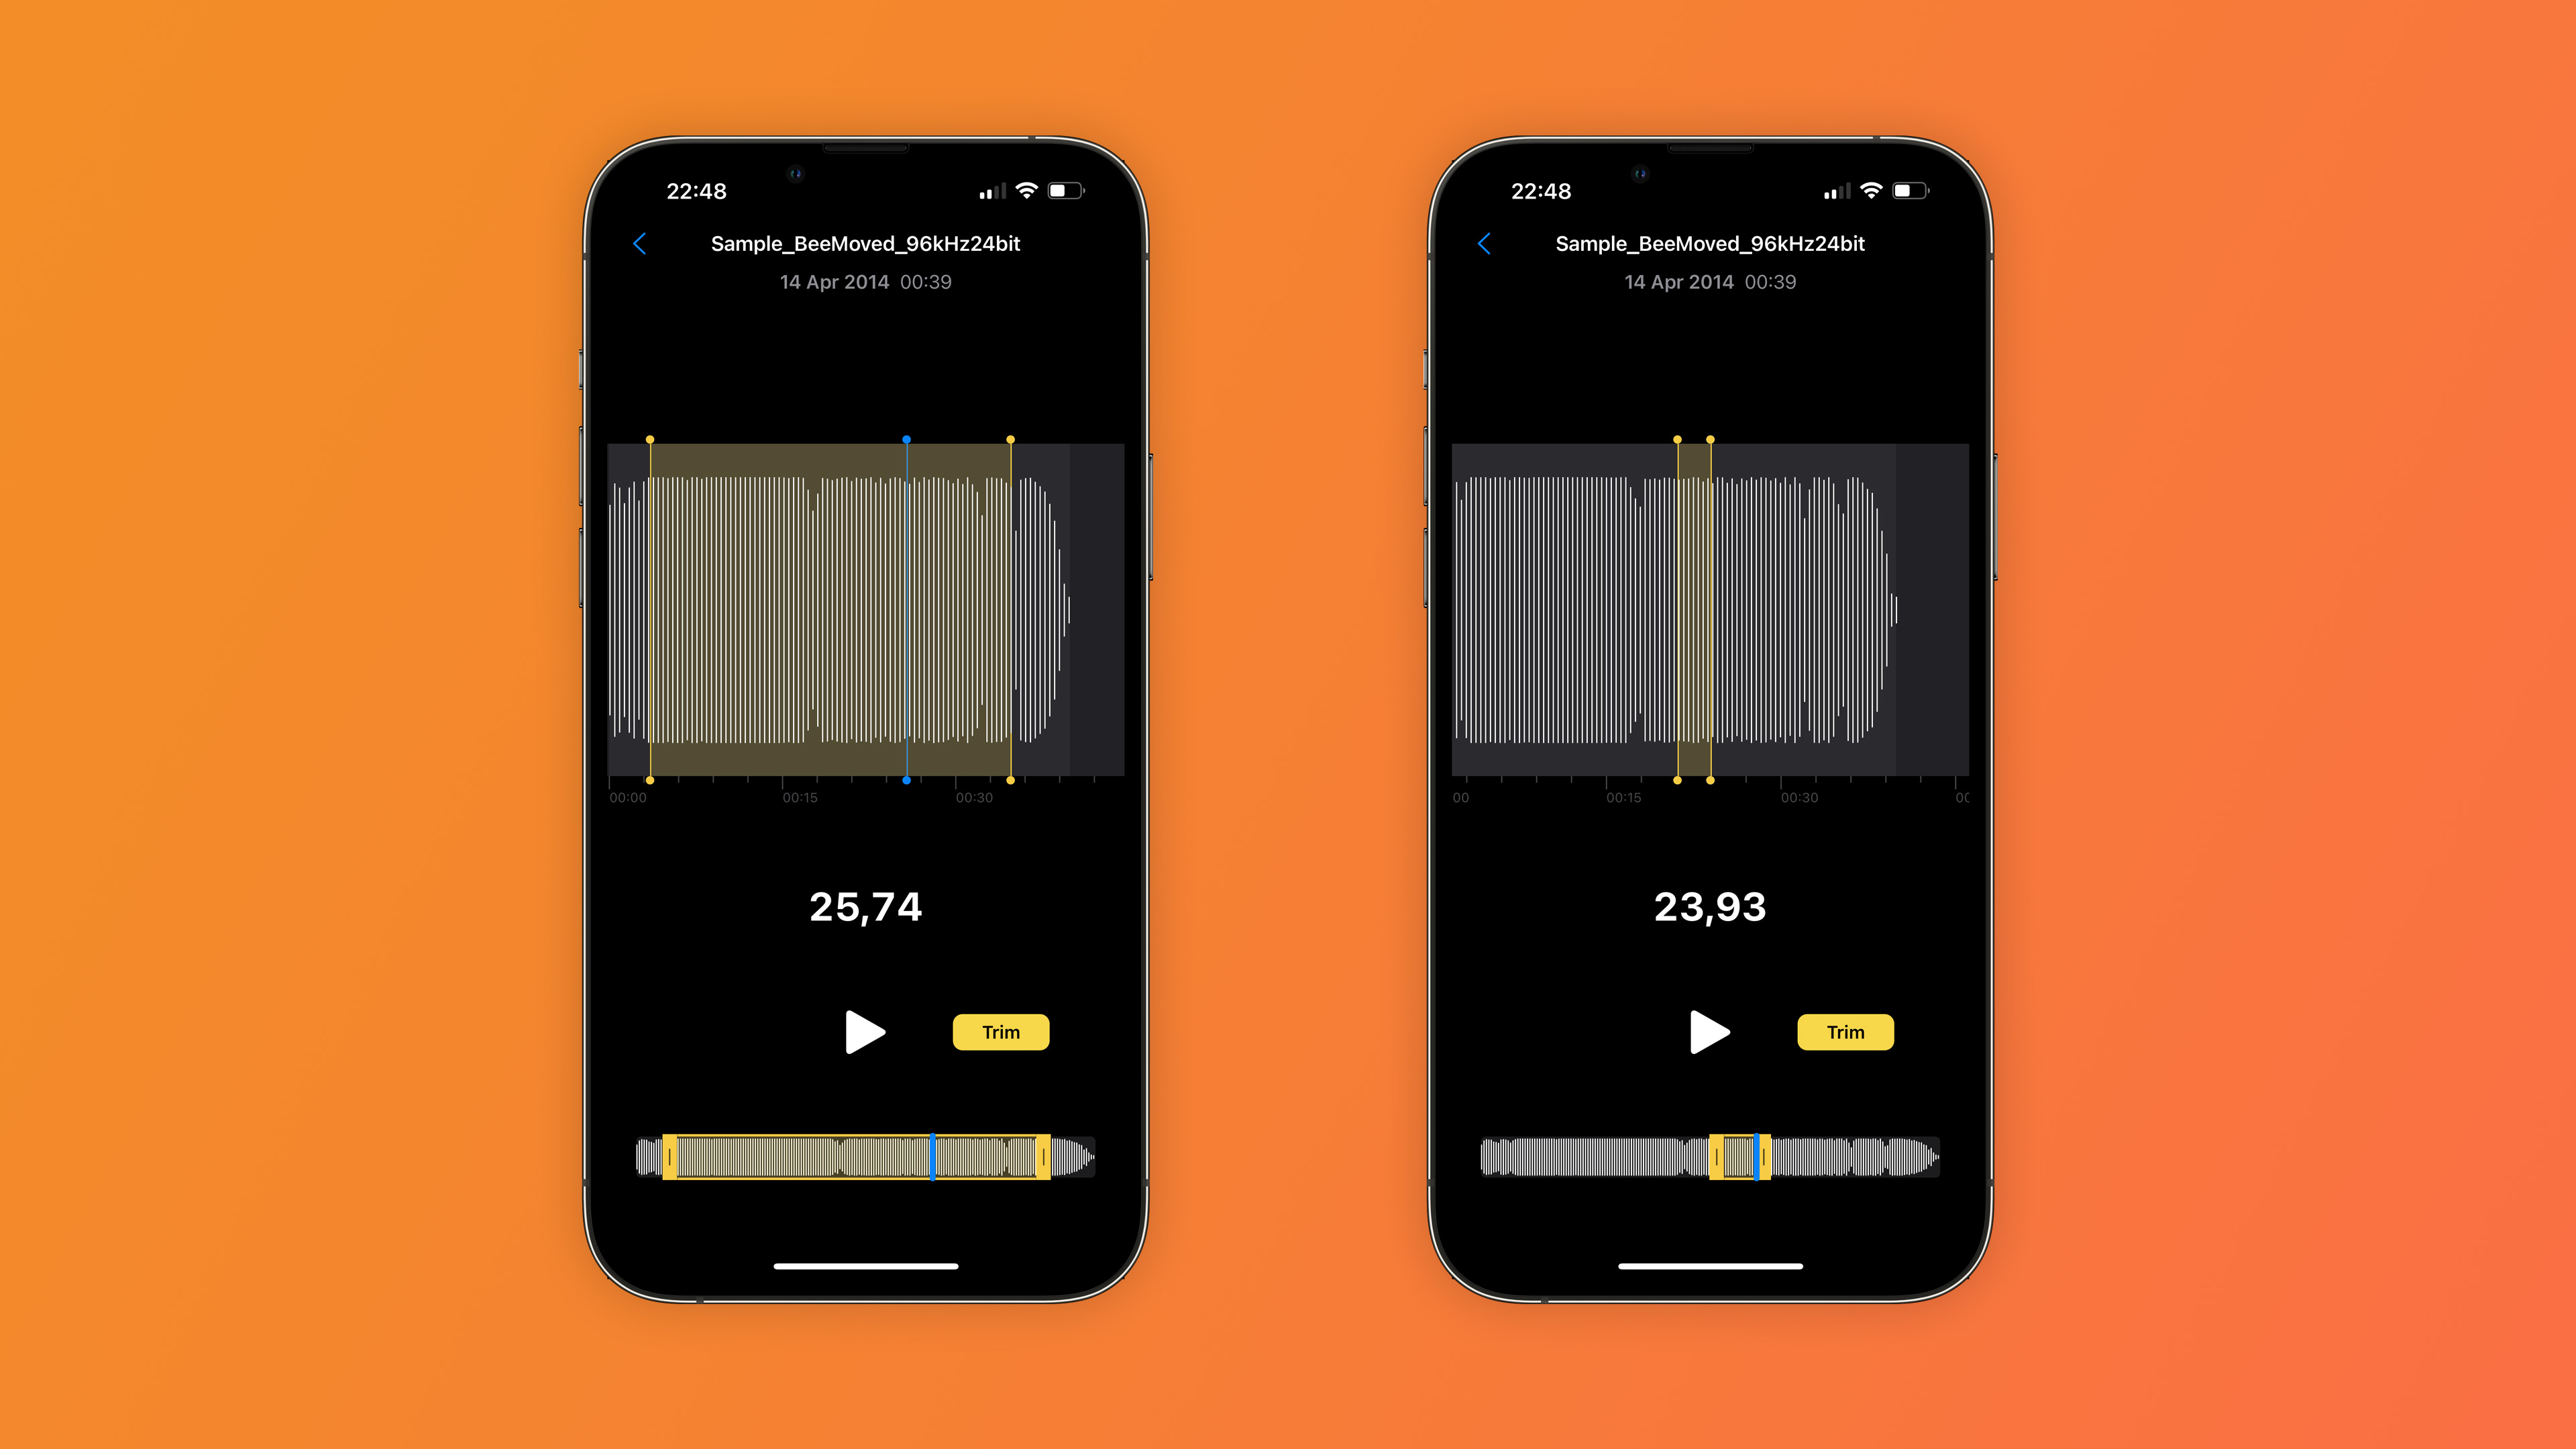 fjende USA tønde Audio Trimmer lets users easily trim any audio files on iOS - 9to5Mac